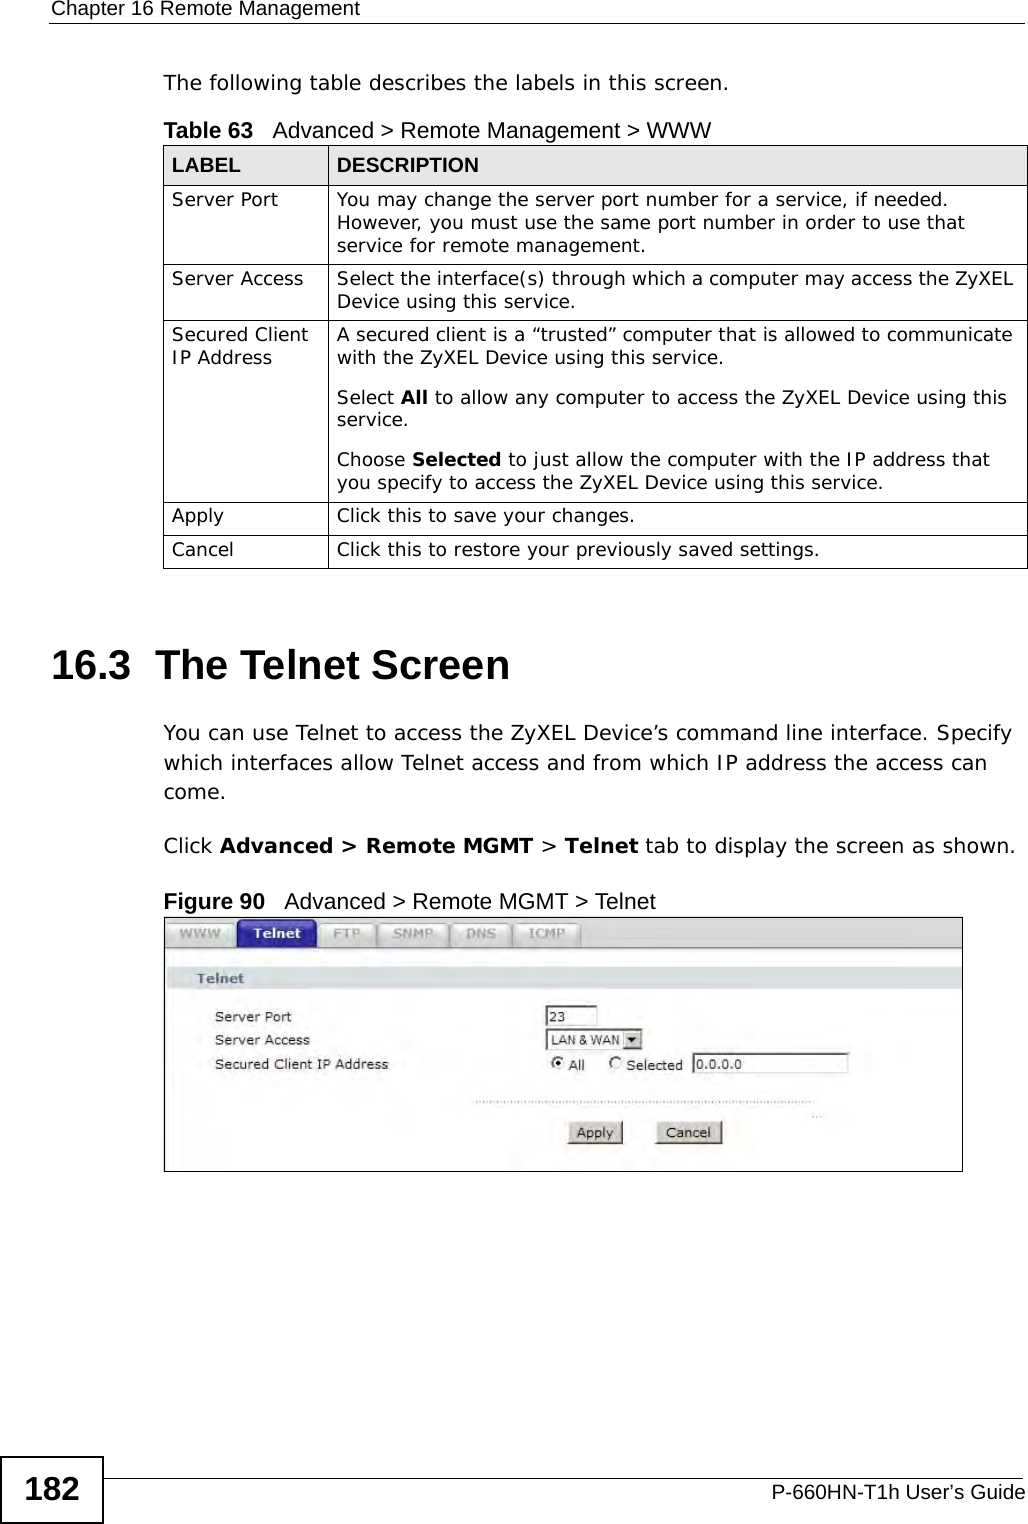 Chapter 16 Remote ManagementP-660HN-T1h User’s Guide182The following table describes the labels in this screen.16.3  The Telnet ScreenYou can use Telnet to access the ZyXEL Device’s command line interface. Specify which interfaces allow Telnet access and from which IP address the access can come.Click Advanced &gt; Remote MGMT &gt; Telnet tab to display the screen as shown. Figure 90   Advanced &gt; Remote MGMT &gt; TelnetTable 63   Advanced &gt; Remote Management &gt; WWWLABEL DESCRIPTIONServer Port You may change the server port number for a service, if needed. However, you must use the same port number in order to use that service for remote management.Server Access Select the interface(s) through which a computer may access the ZyXEL Device using this service.Secured Client IP Address A secured client is a “trusted” computer that is allowed to communicate with the ZyXEL Device using this service. Select All to allow any computer to access the ZyXEL Device using this service.Choose Selected to just allow the computer with the IP address that you specify to access the ZyXEL Device using this service.Apply Click this to save your changes.Cancel Click this to restore your previously saved settings.